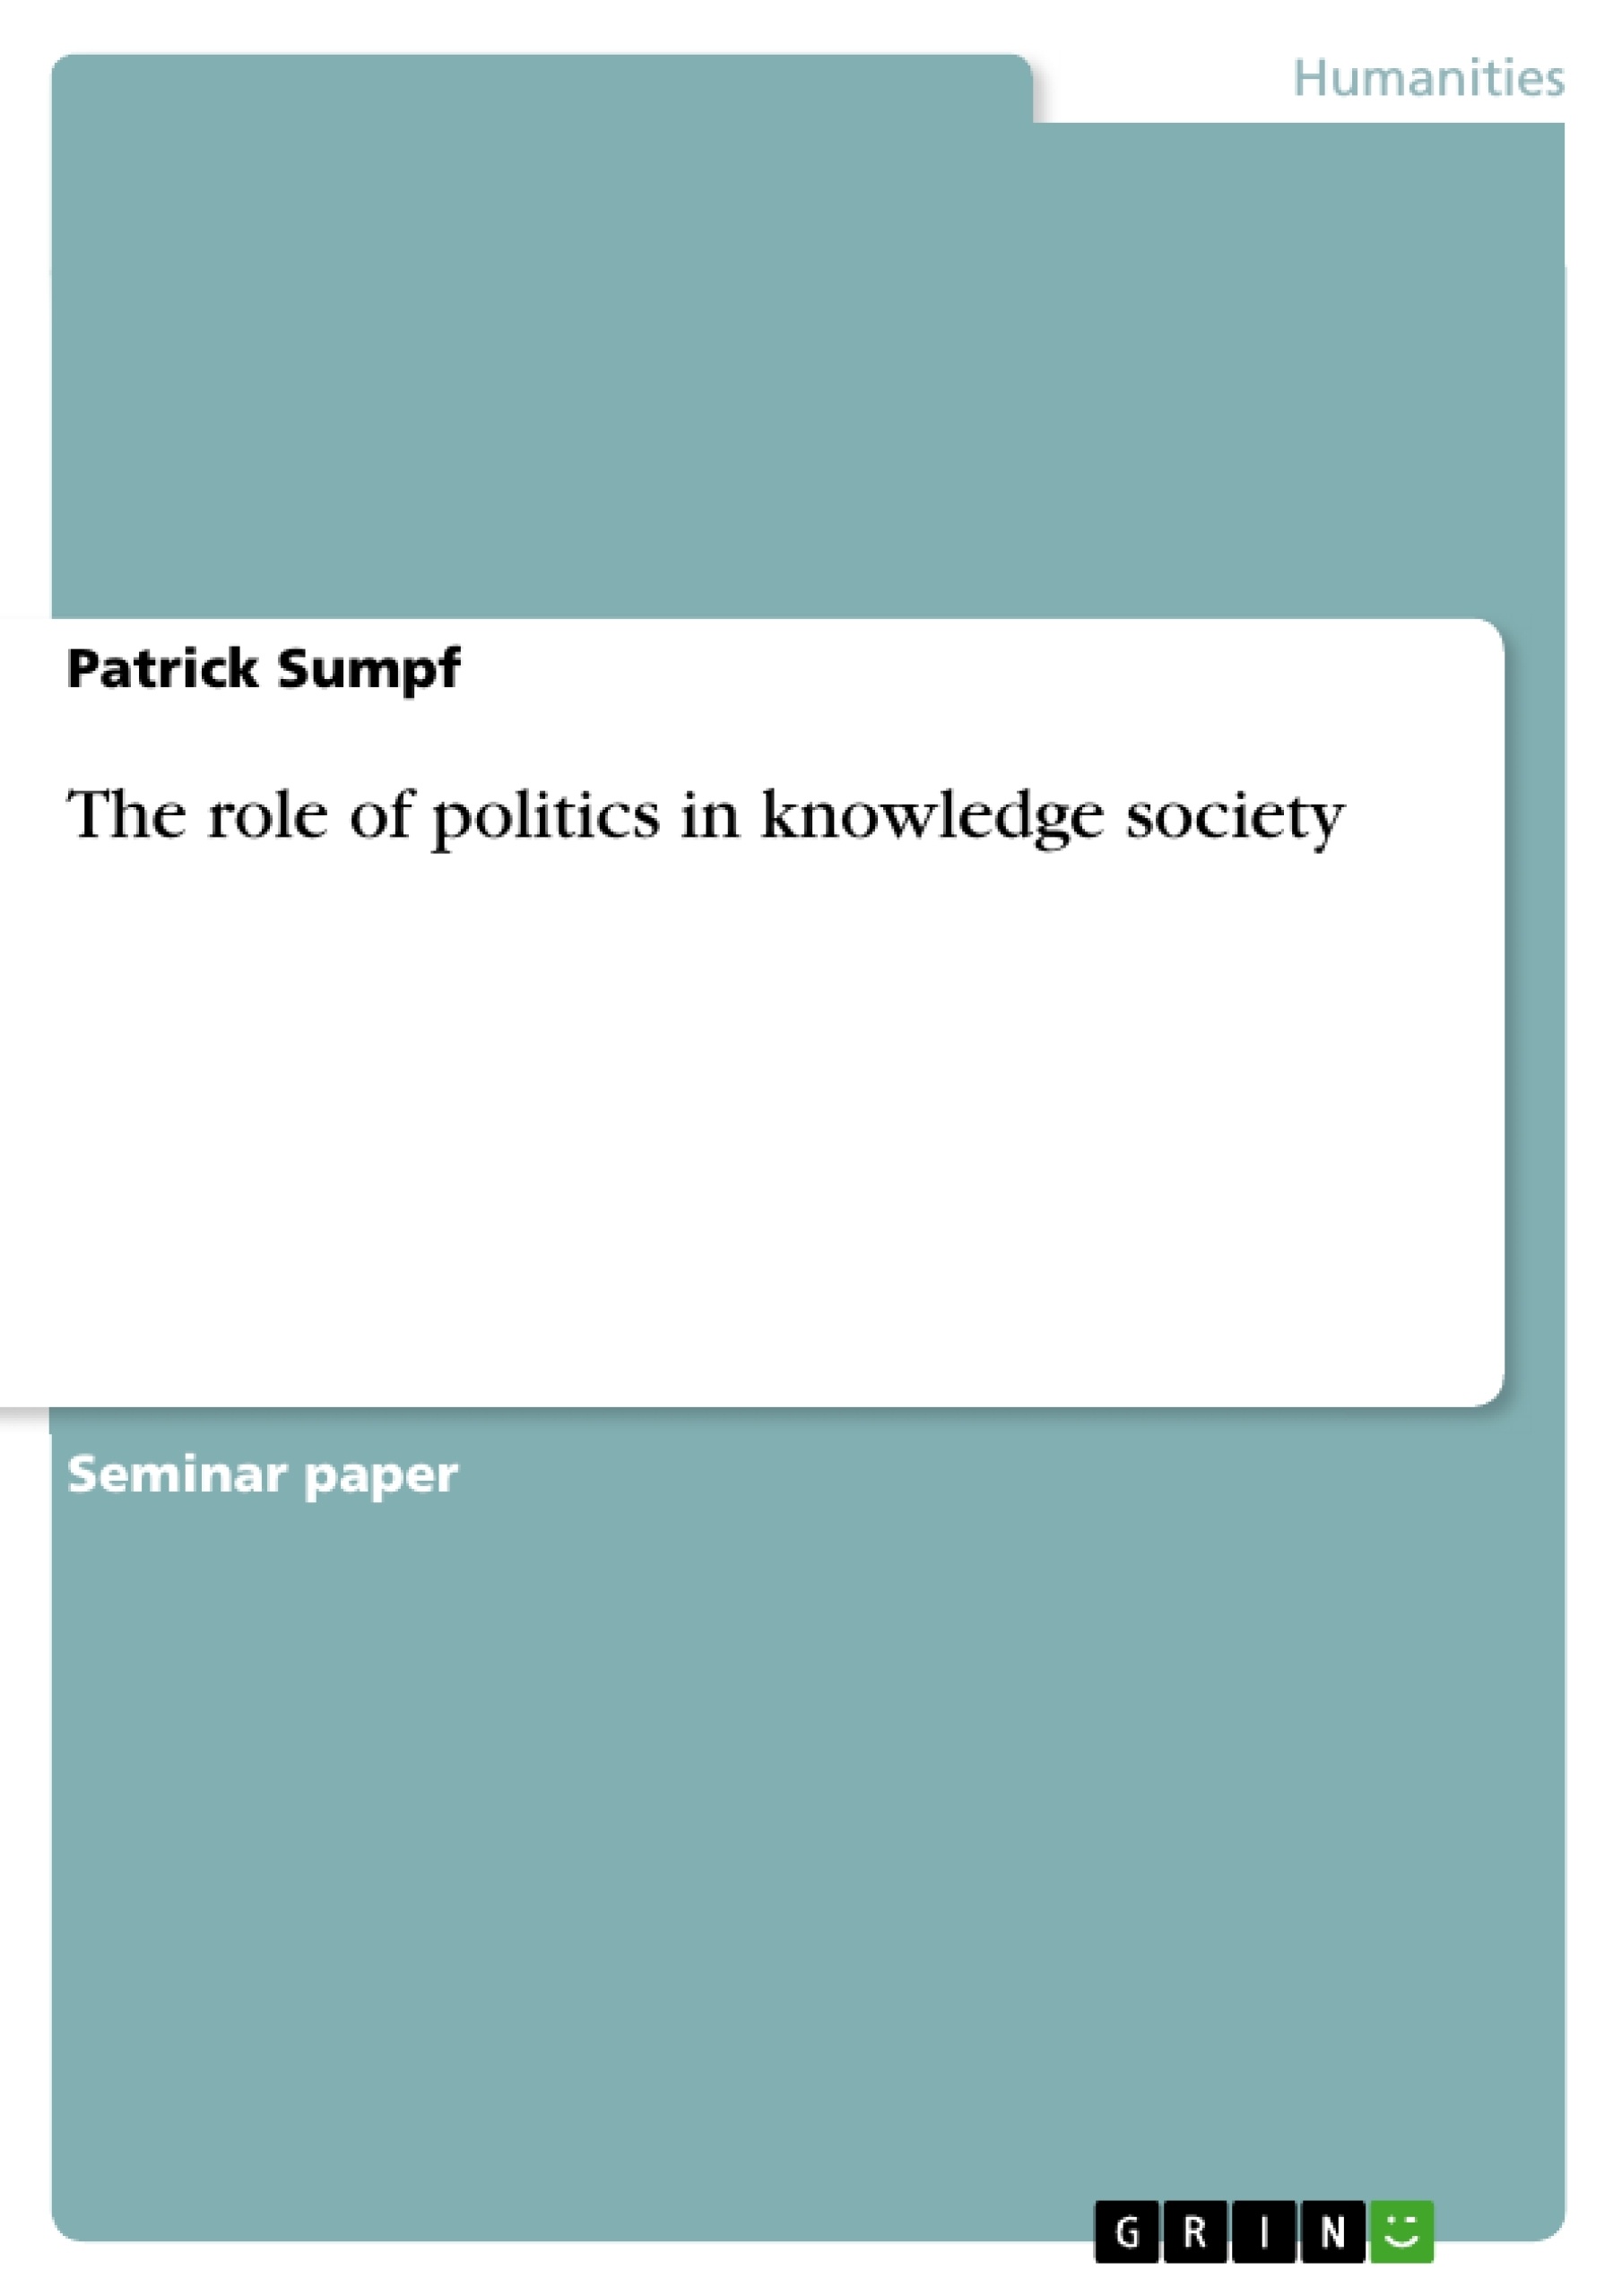 I. Introduction to the Role of Politics in Society